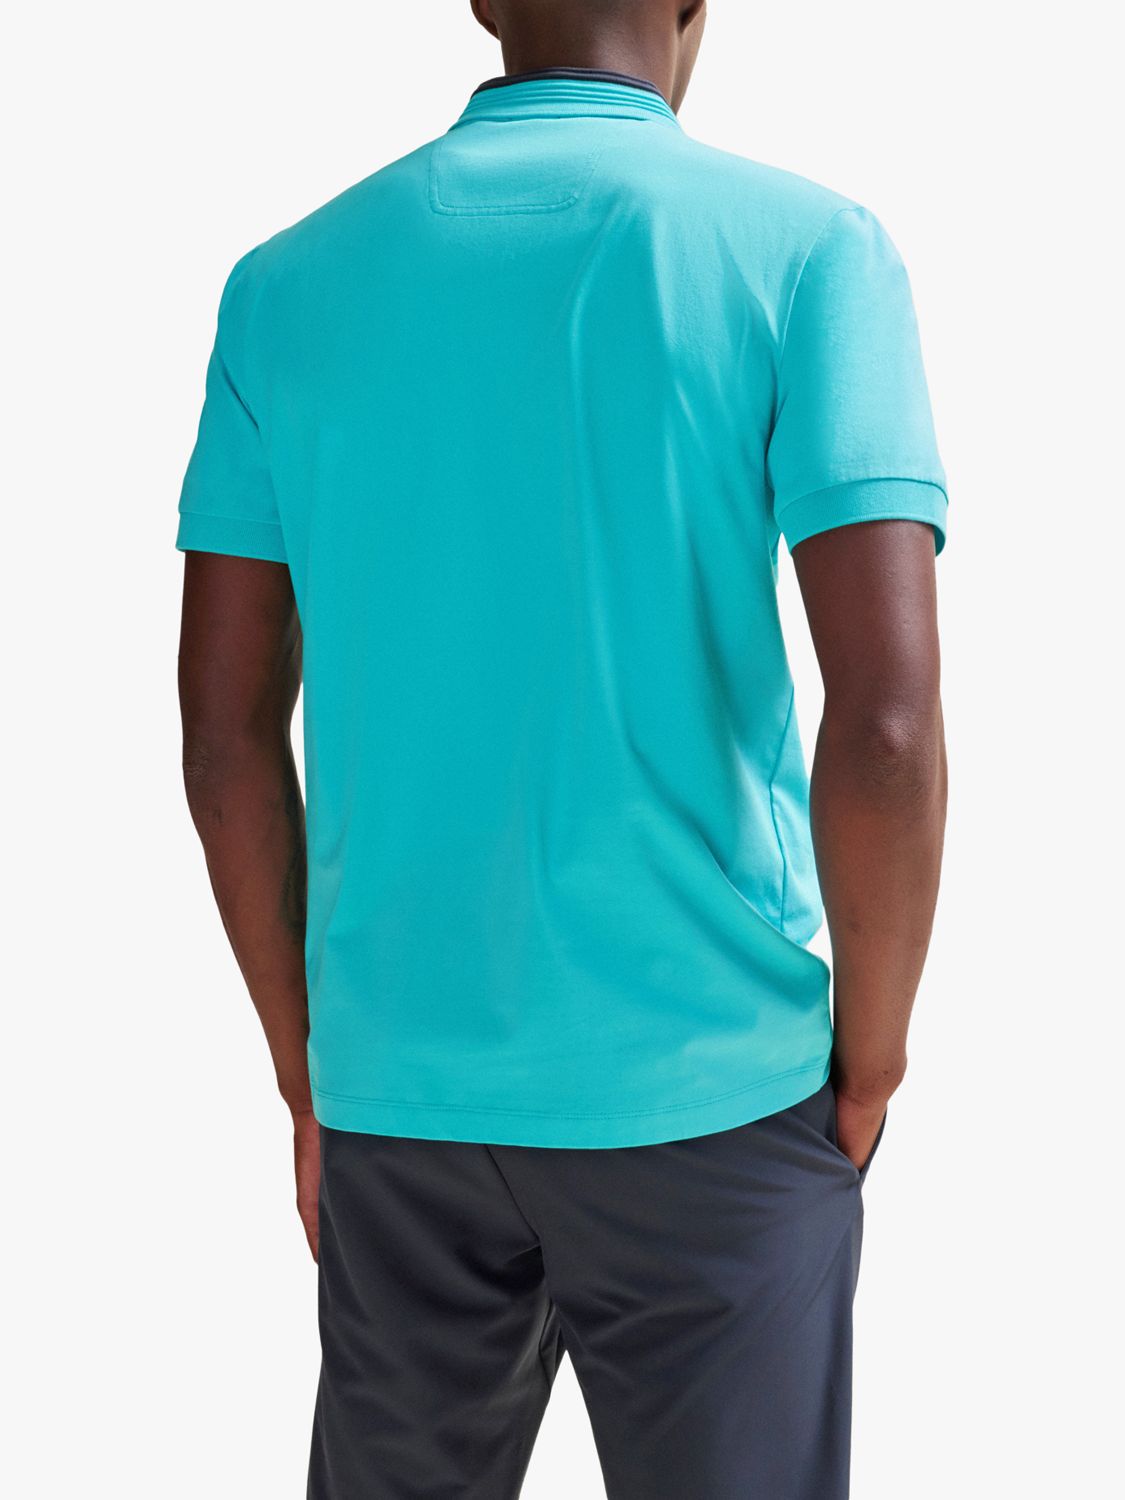 Buy BOSS Paddy 367 Polo Shirt, Teal Online at johnlewis.com